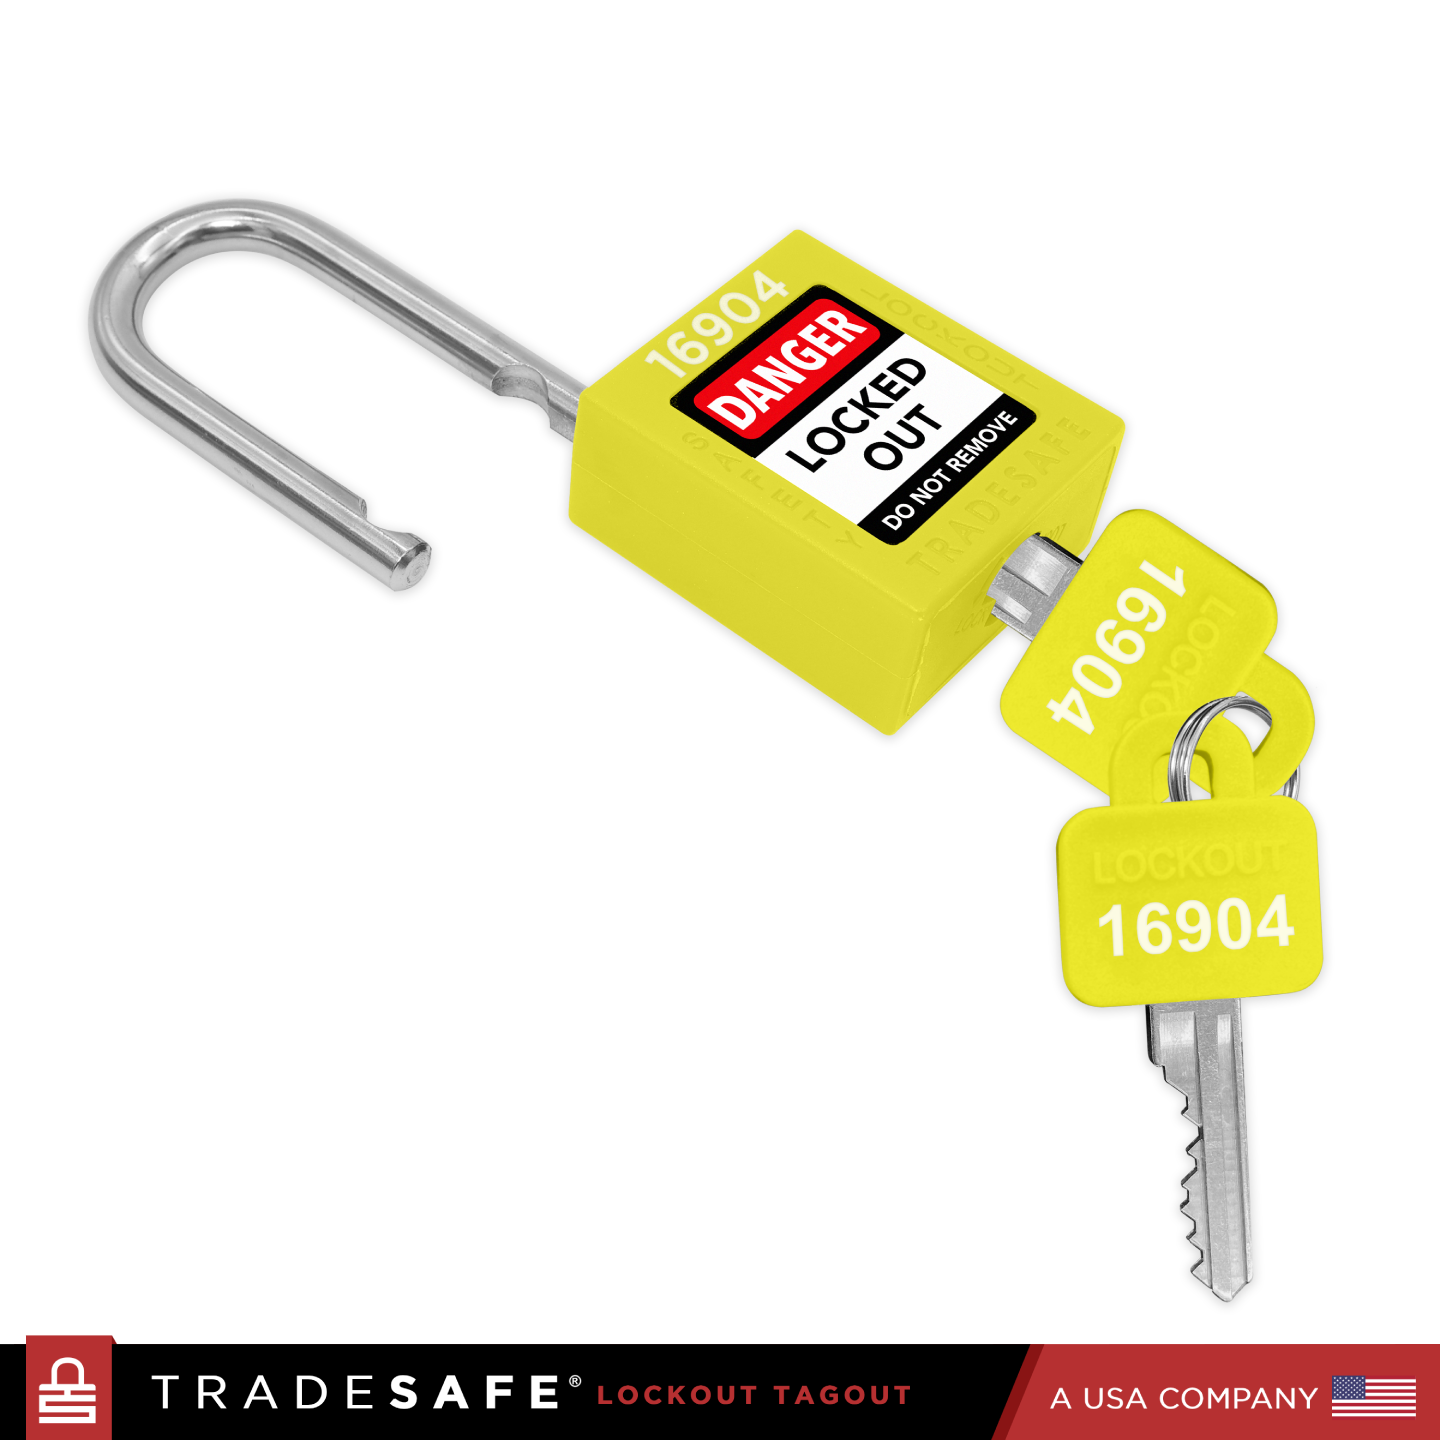 a yellow loto padlock with 2 keys, 1 key inserted